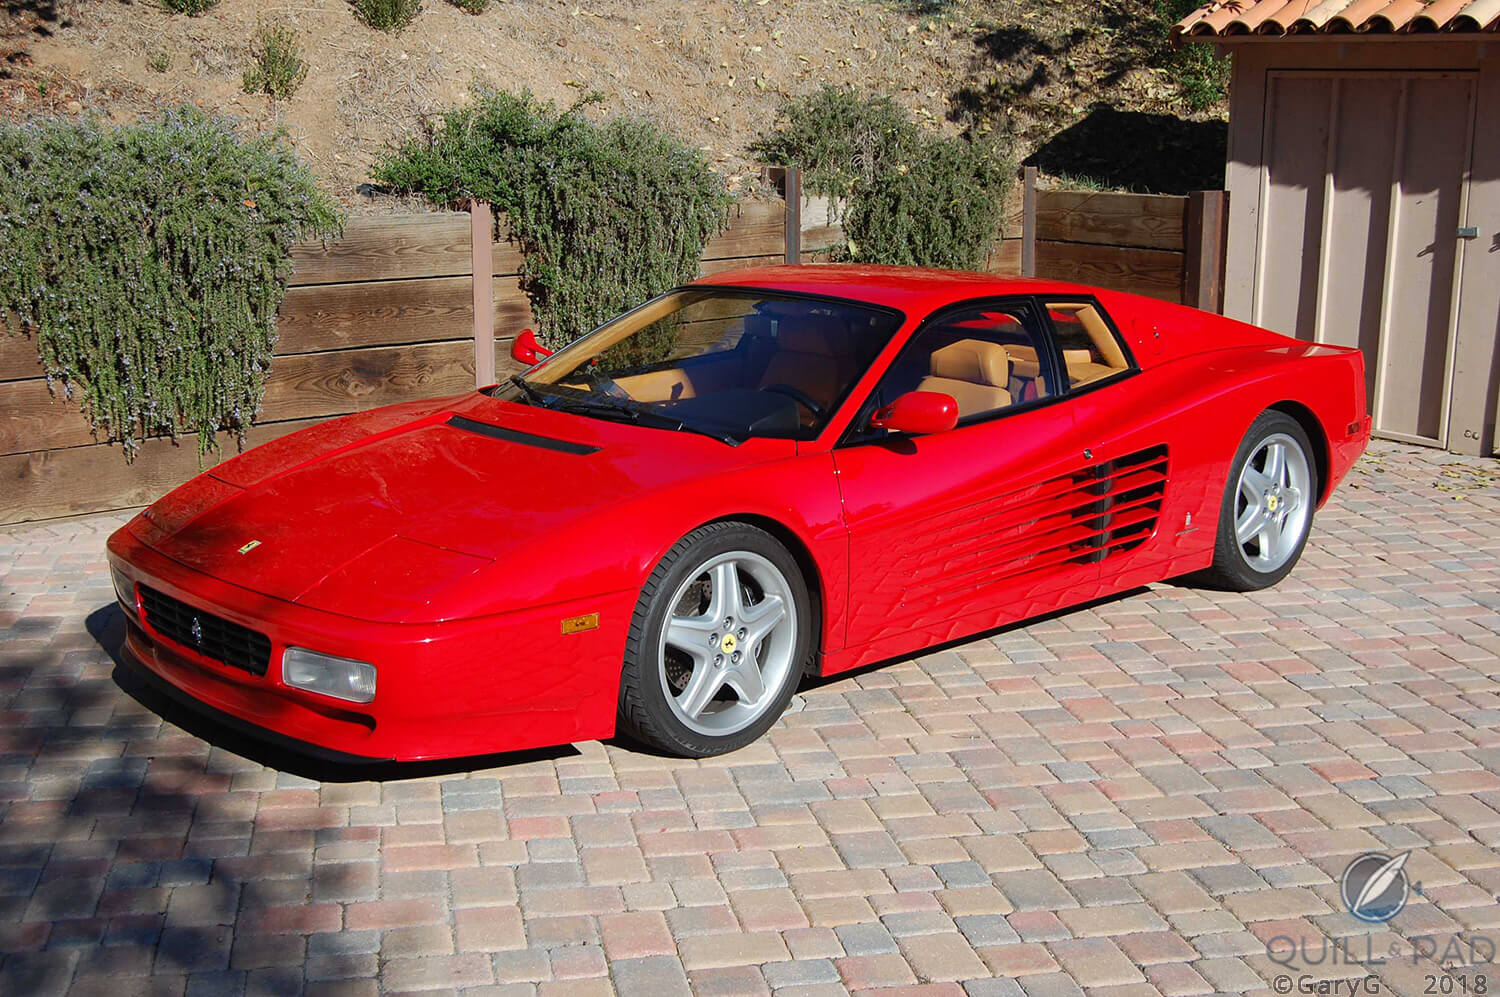 Didn’t get hurt, didn’t get rich: the author’s Ferrari 512TR, sold at a bargain price